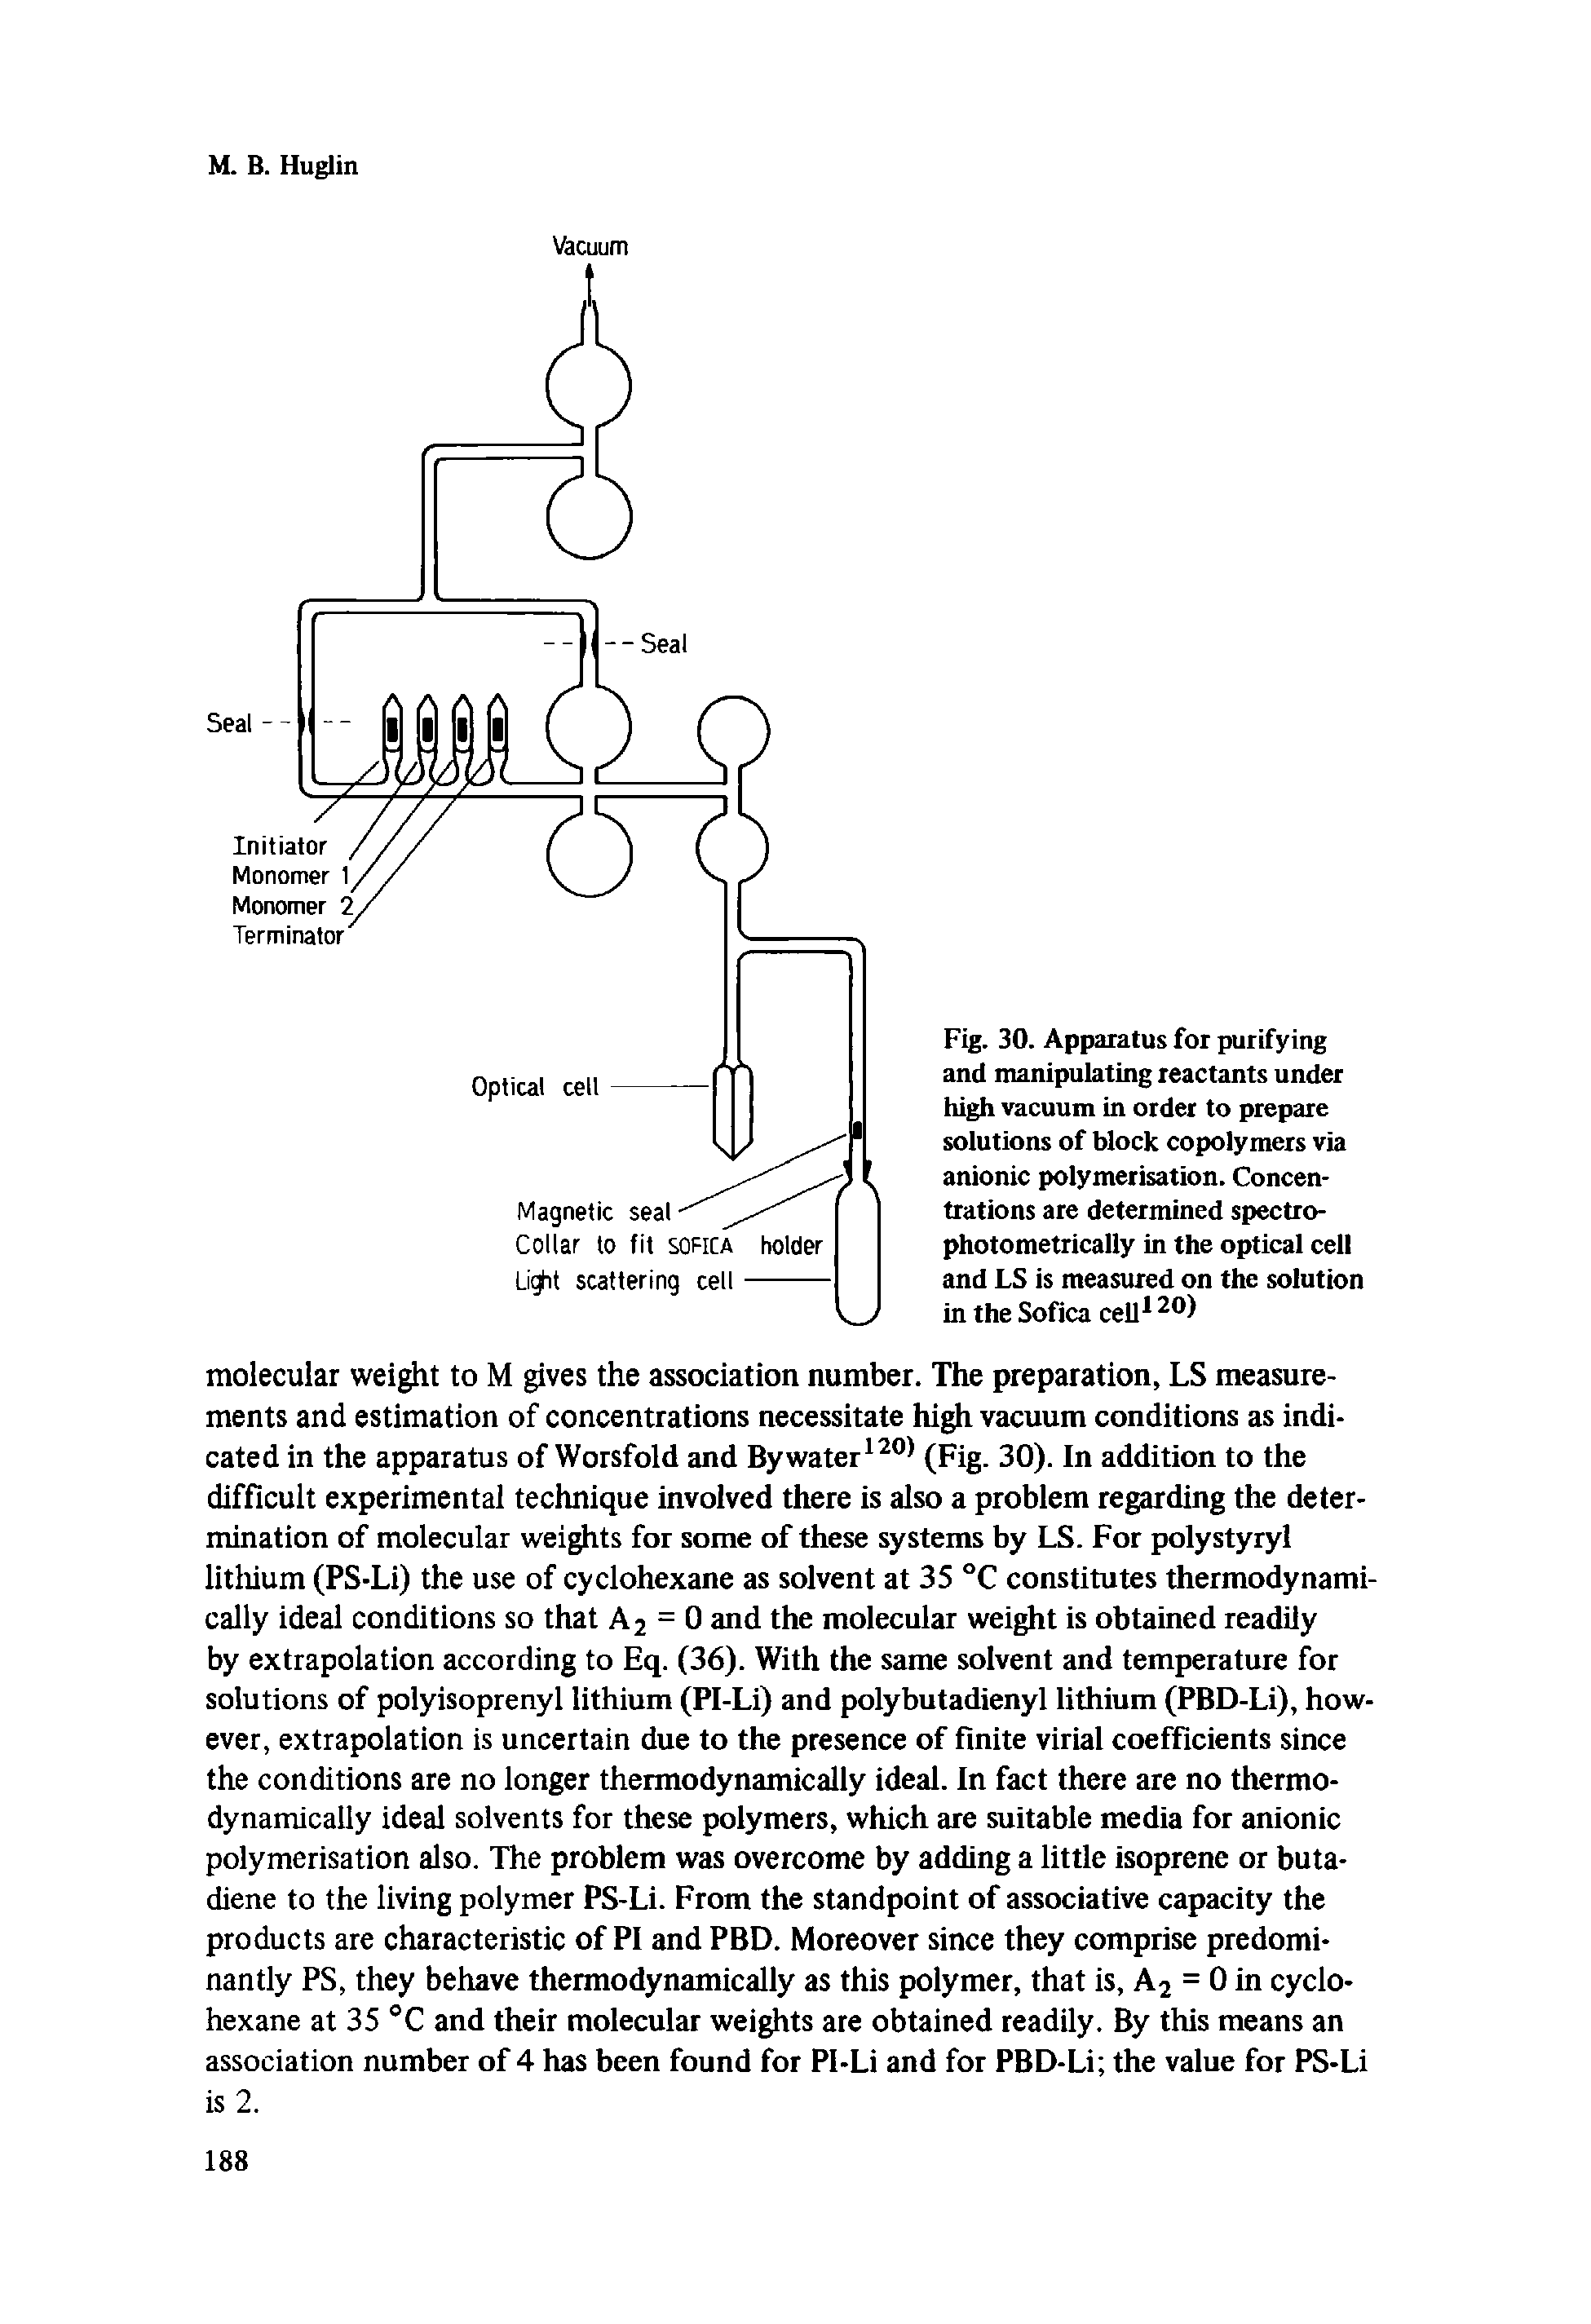 Fig. 30. Apparatus for purifying and manipulating reactants under high vacuum in order to prepare solutions of block copolymers via anionic polymerisation. Concentrations are determined spectro-photometrically in the optical cell and LS is measured on the solution in the Sofica cell120 ...